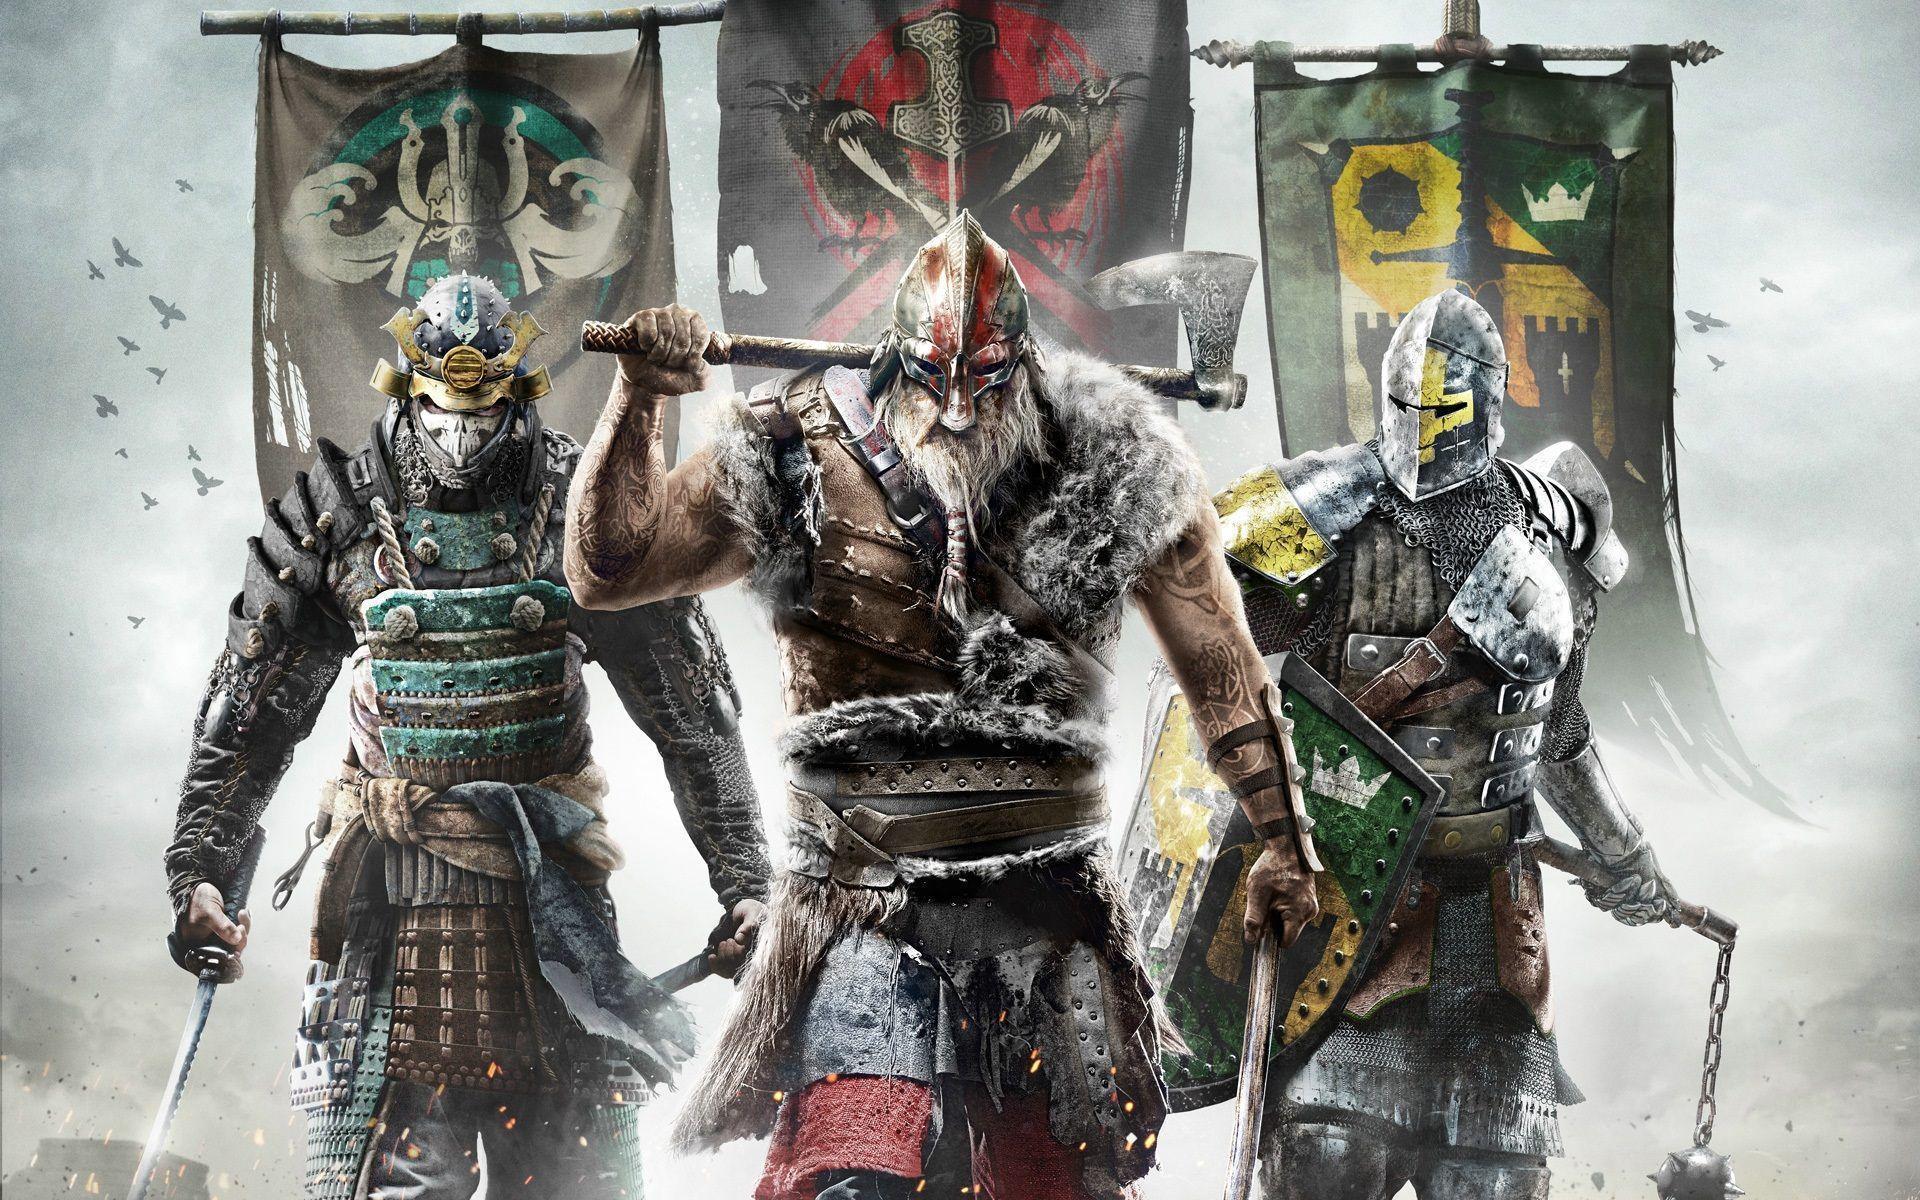 For Honor Wallpaper Hd: What we already know Collection For Free